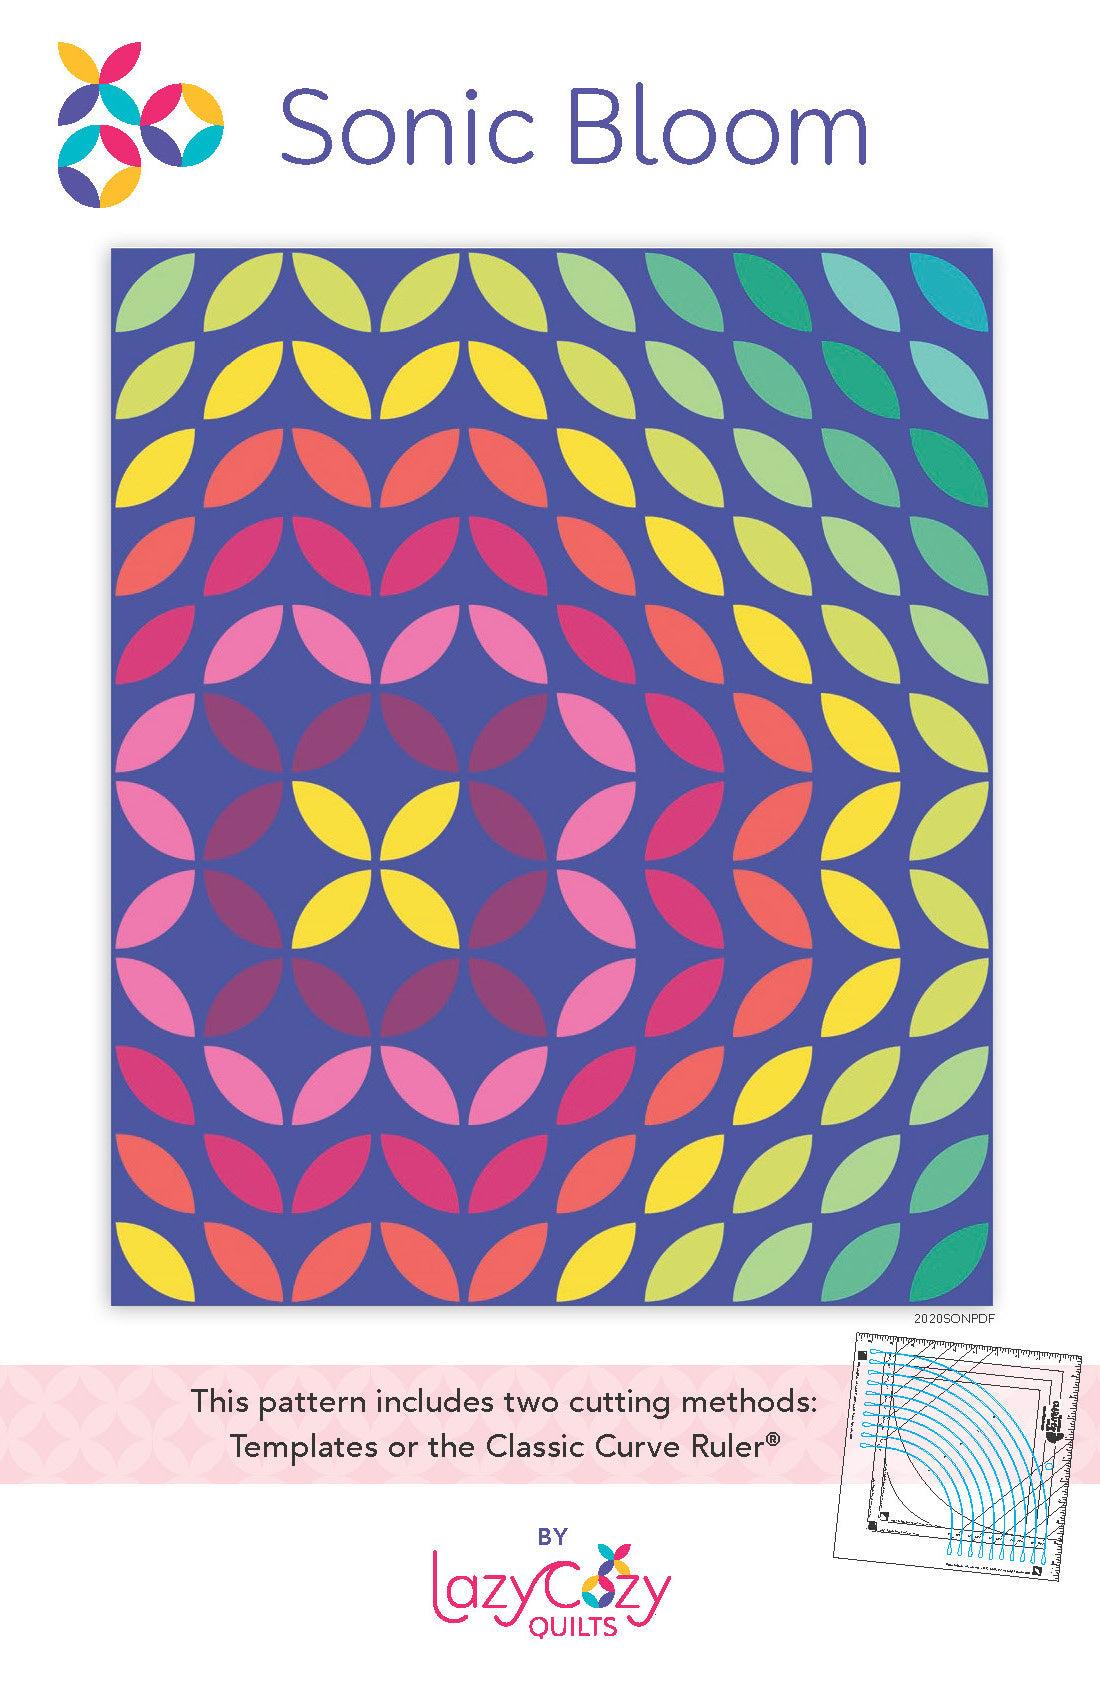 Sonic Bloom Quilt Pattern by Lazy Cozy Quilts